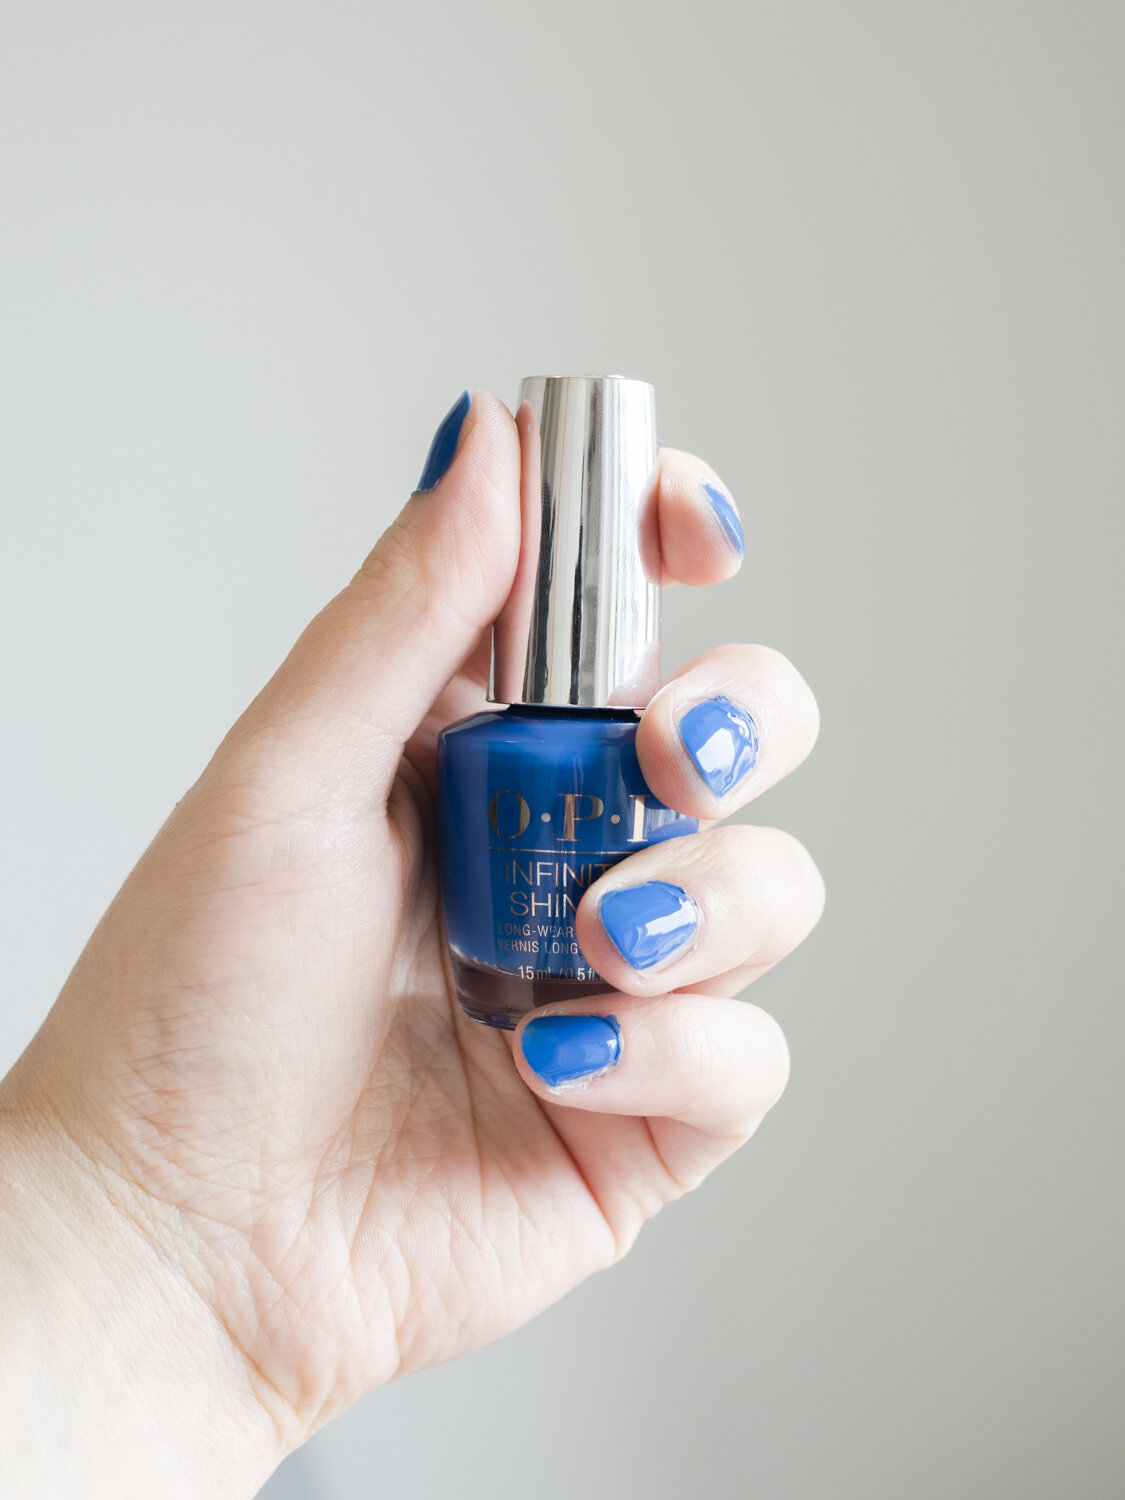 Blueberry Milk Nails Are This Summer's Latest Manicure Trend: Here's How to  Get the Look at Home